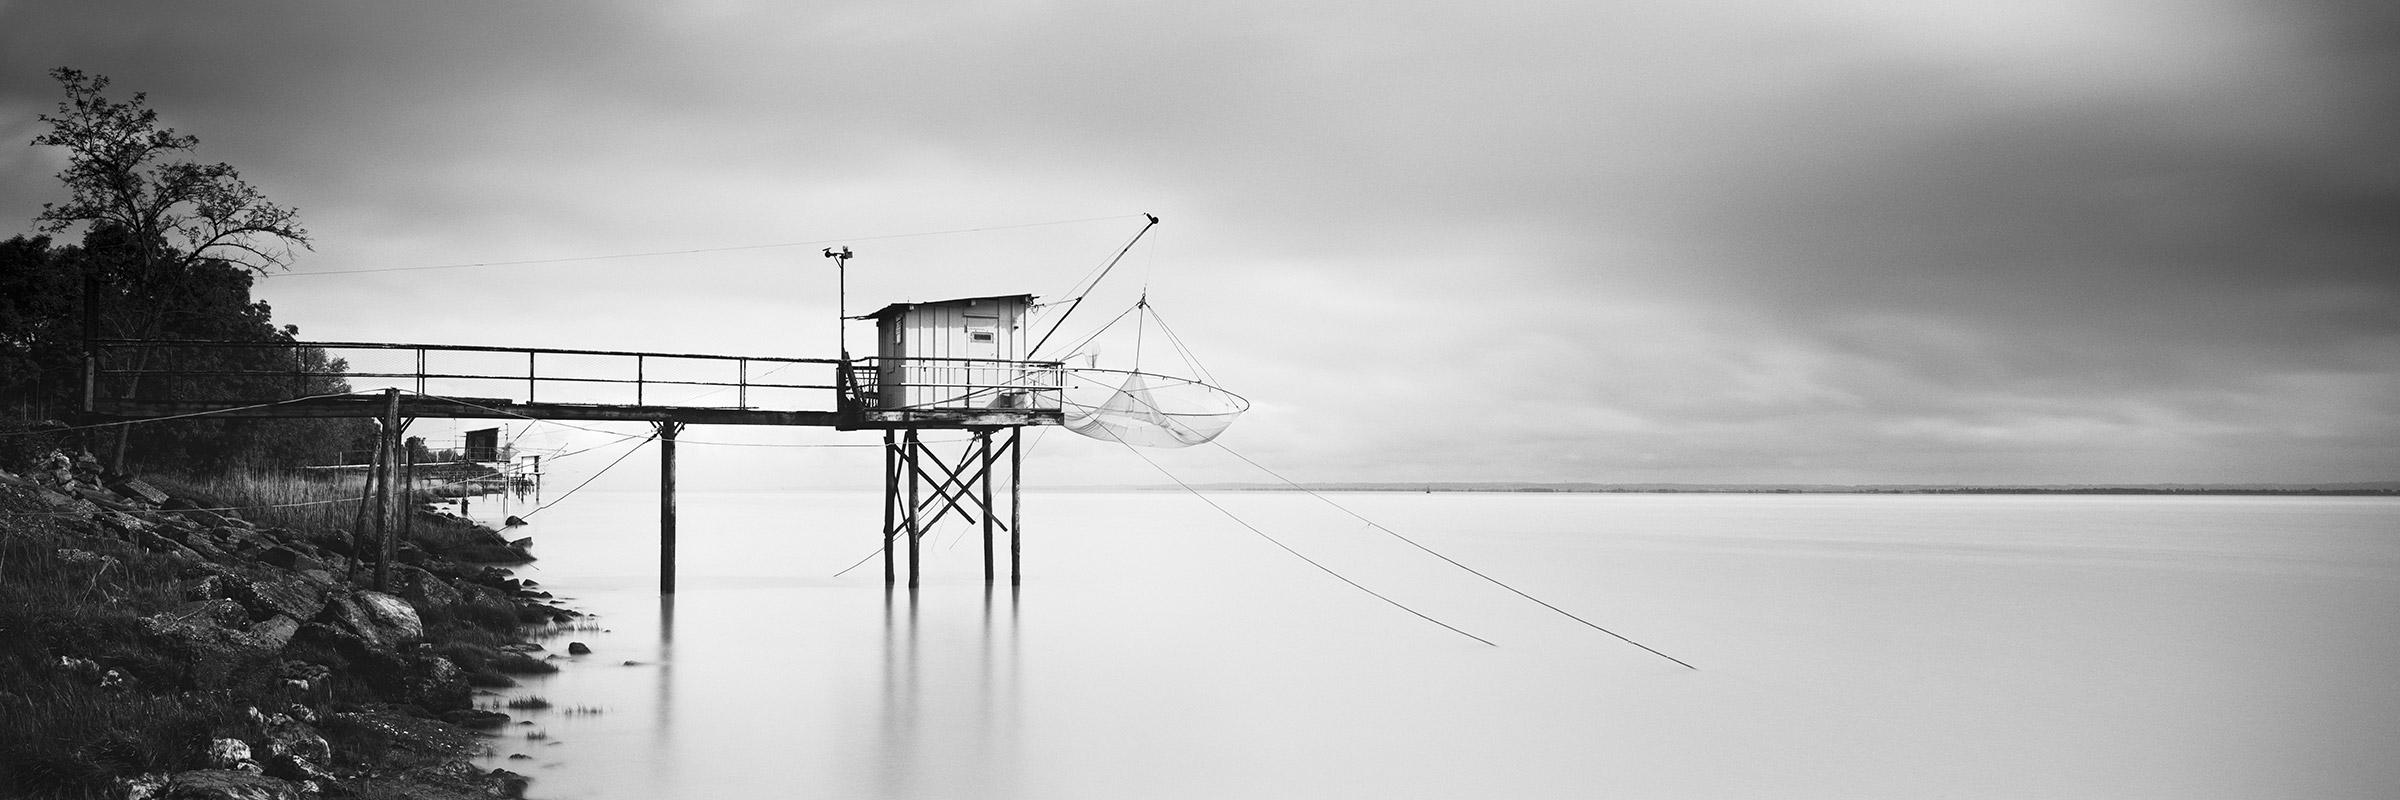 Gerald Berghammer Black and White Photograph - Stilt House Panorama, Fishing, Storm, black white fineart landscape photography